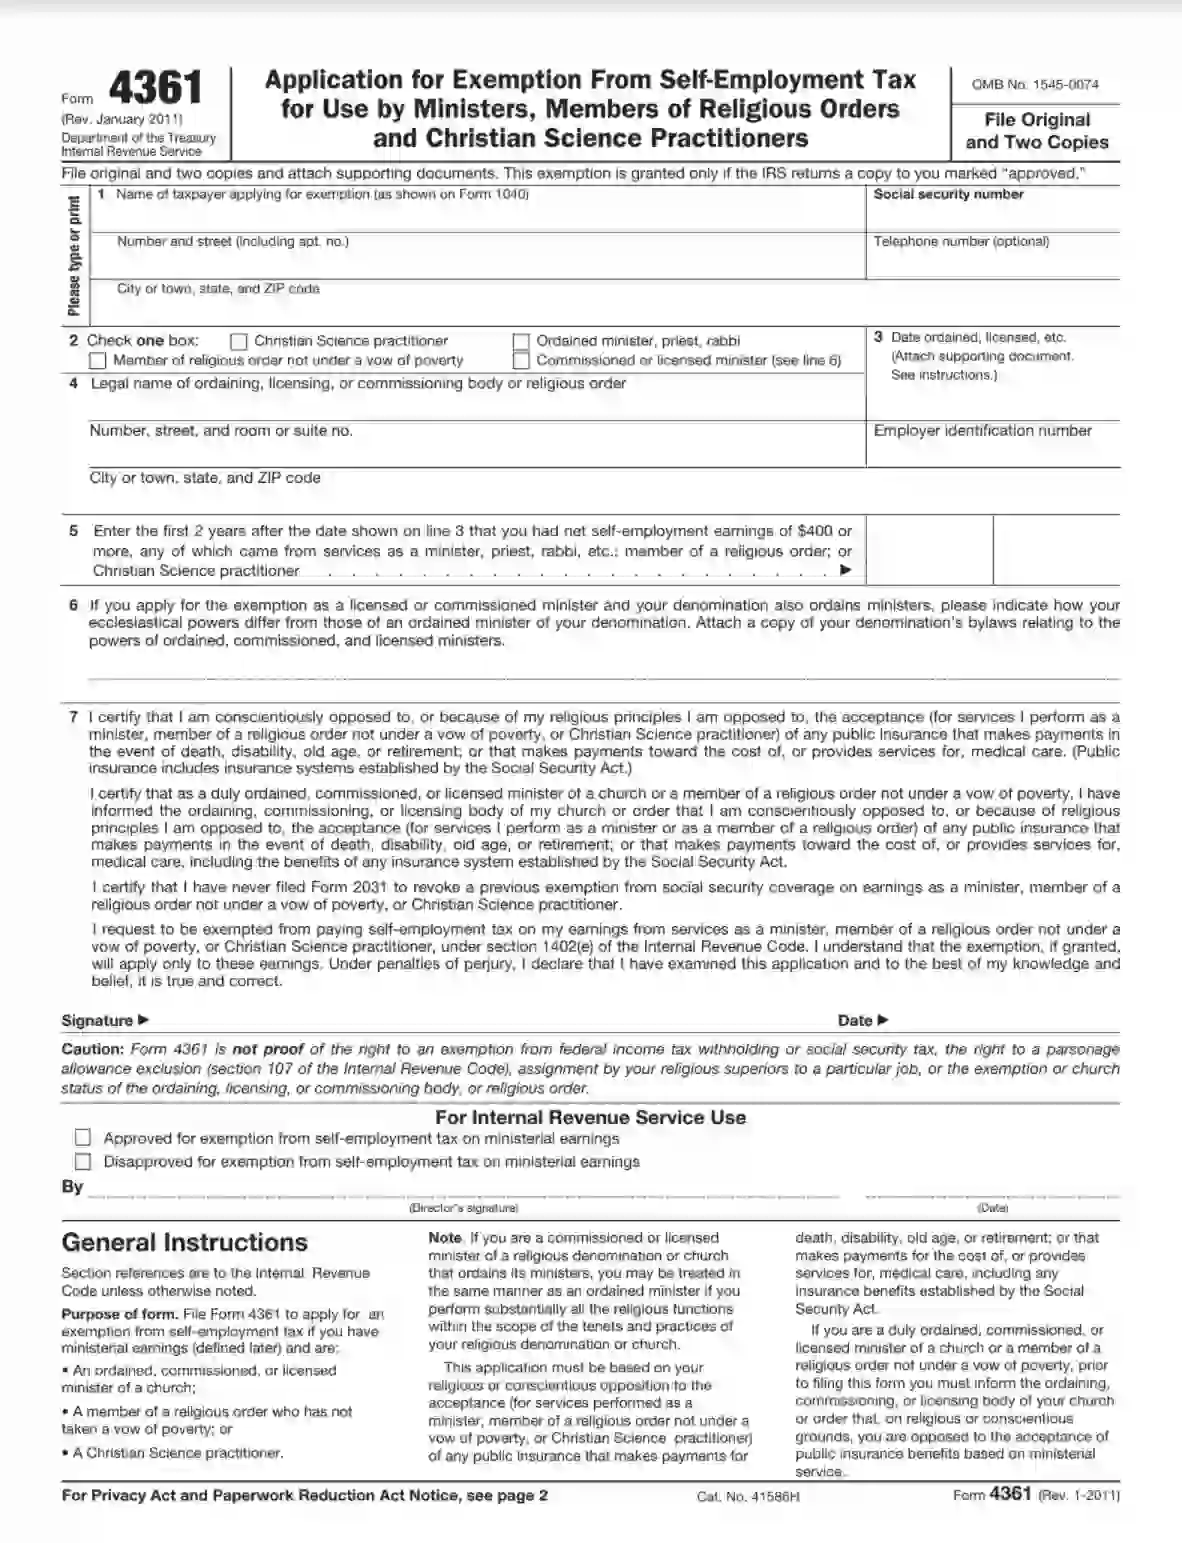 IRS Form 4361 Fill Out Printable PDF Forms Online